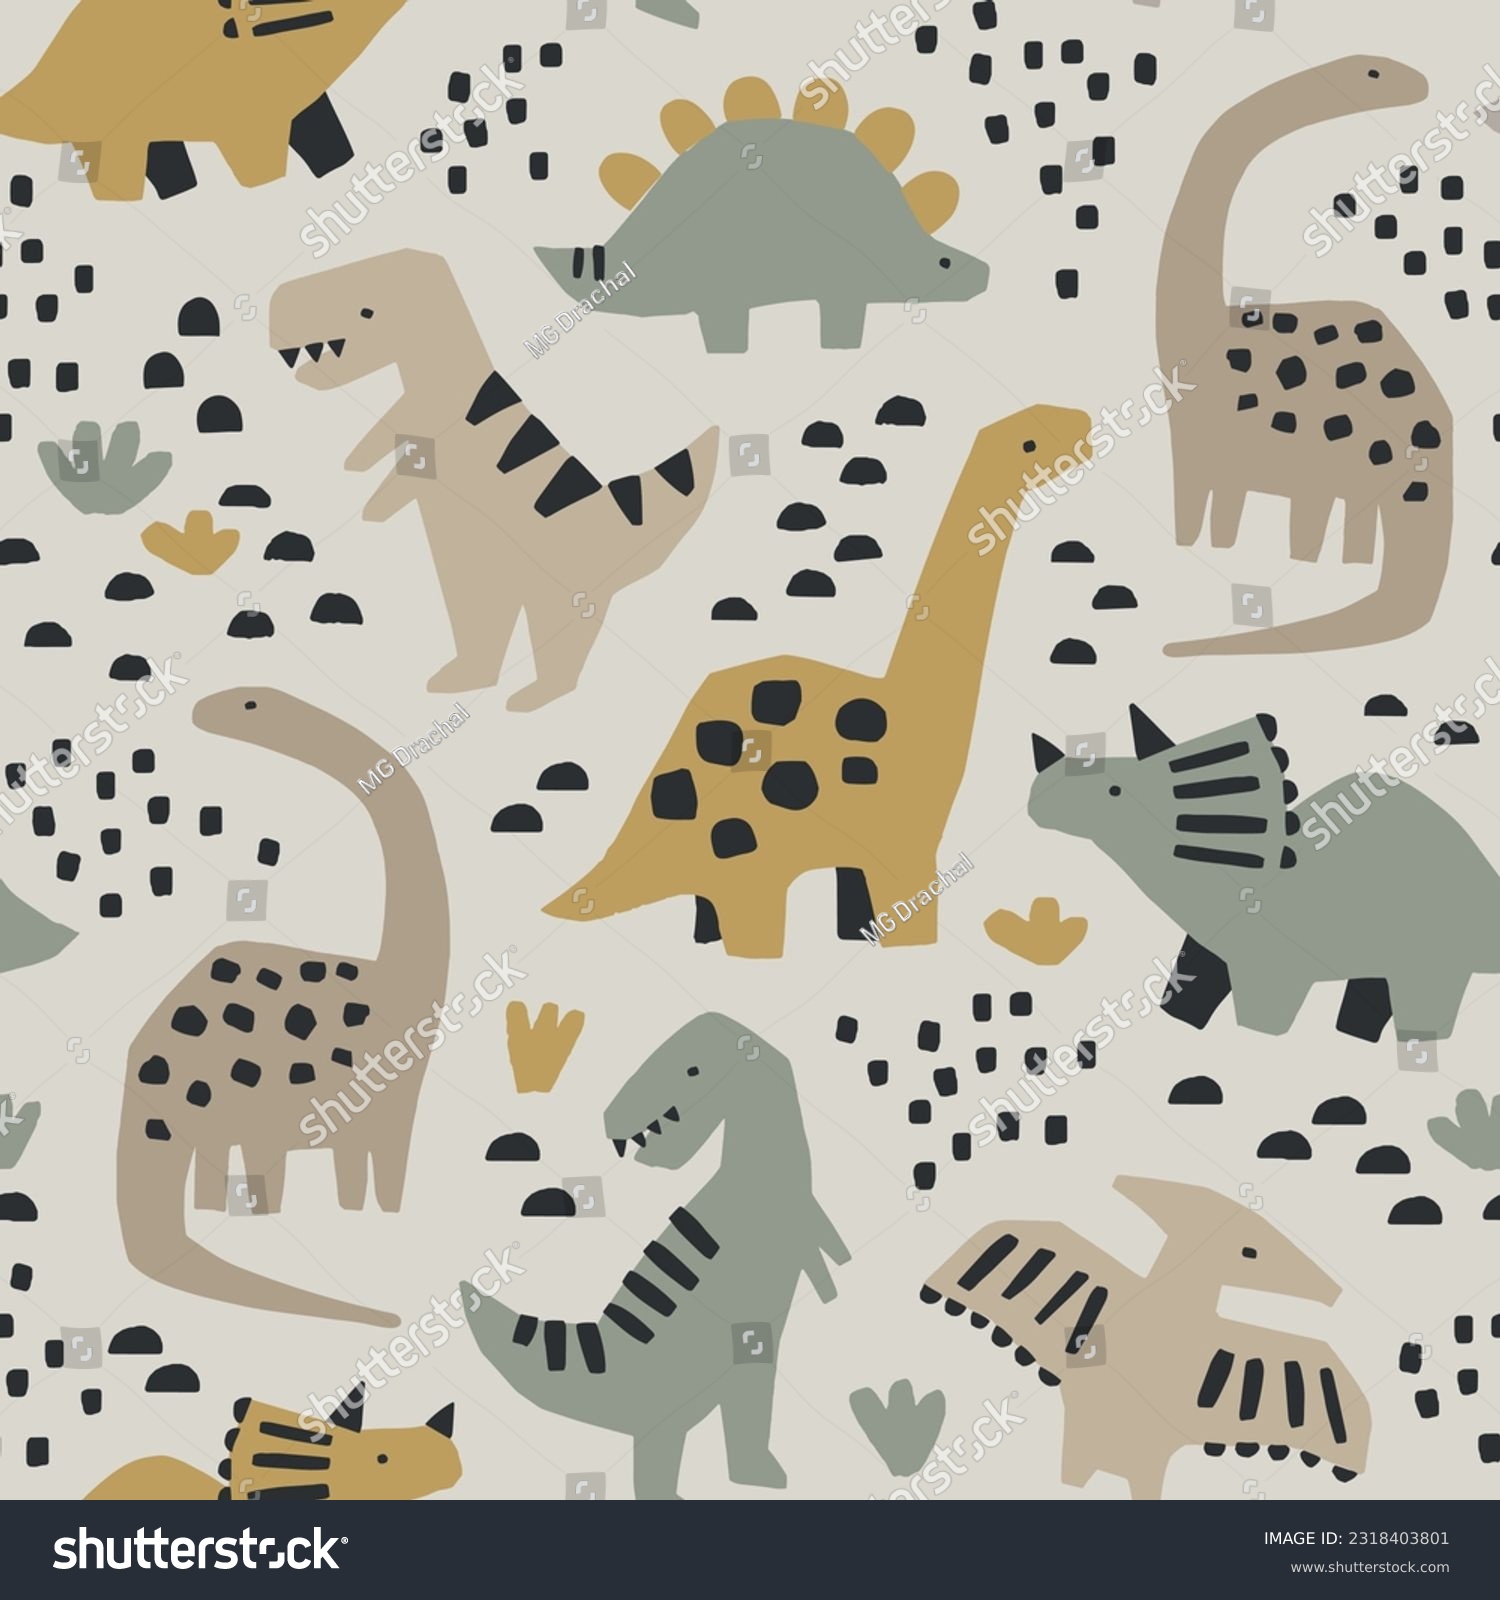 SVG of Hand drawn seamless pattern with dinosaurs and abstract shapes. Colorful Dino design. Perfect for kids fabric, textile, nursery wallpaper. Cute dino design. Vector illustration. svg